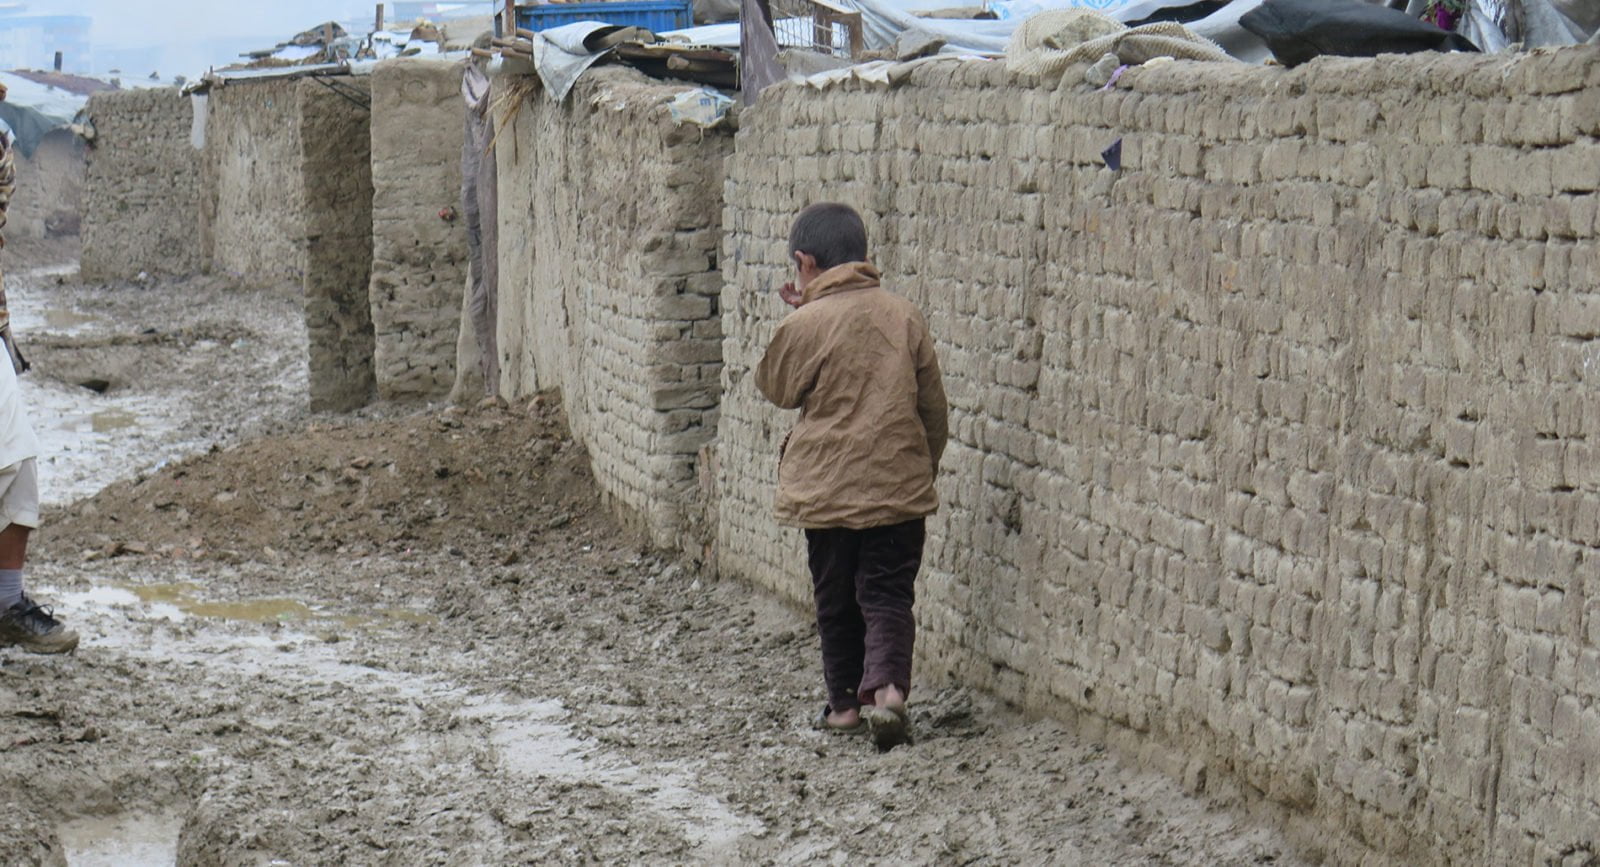 A child in a settlement for internally displaced people in Kabul, Afghanistan.